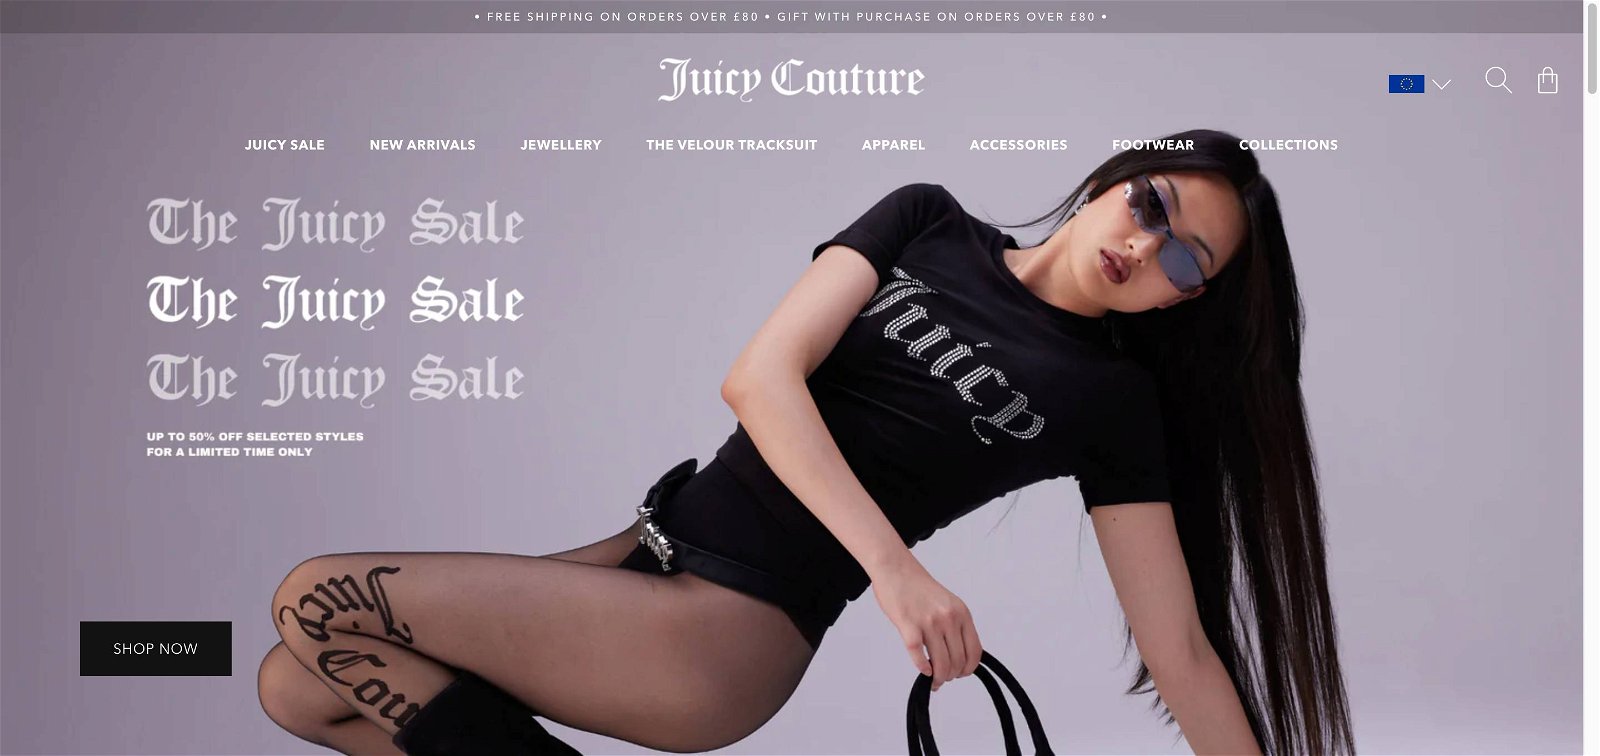 Juicy couture uk